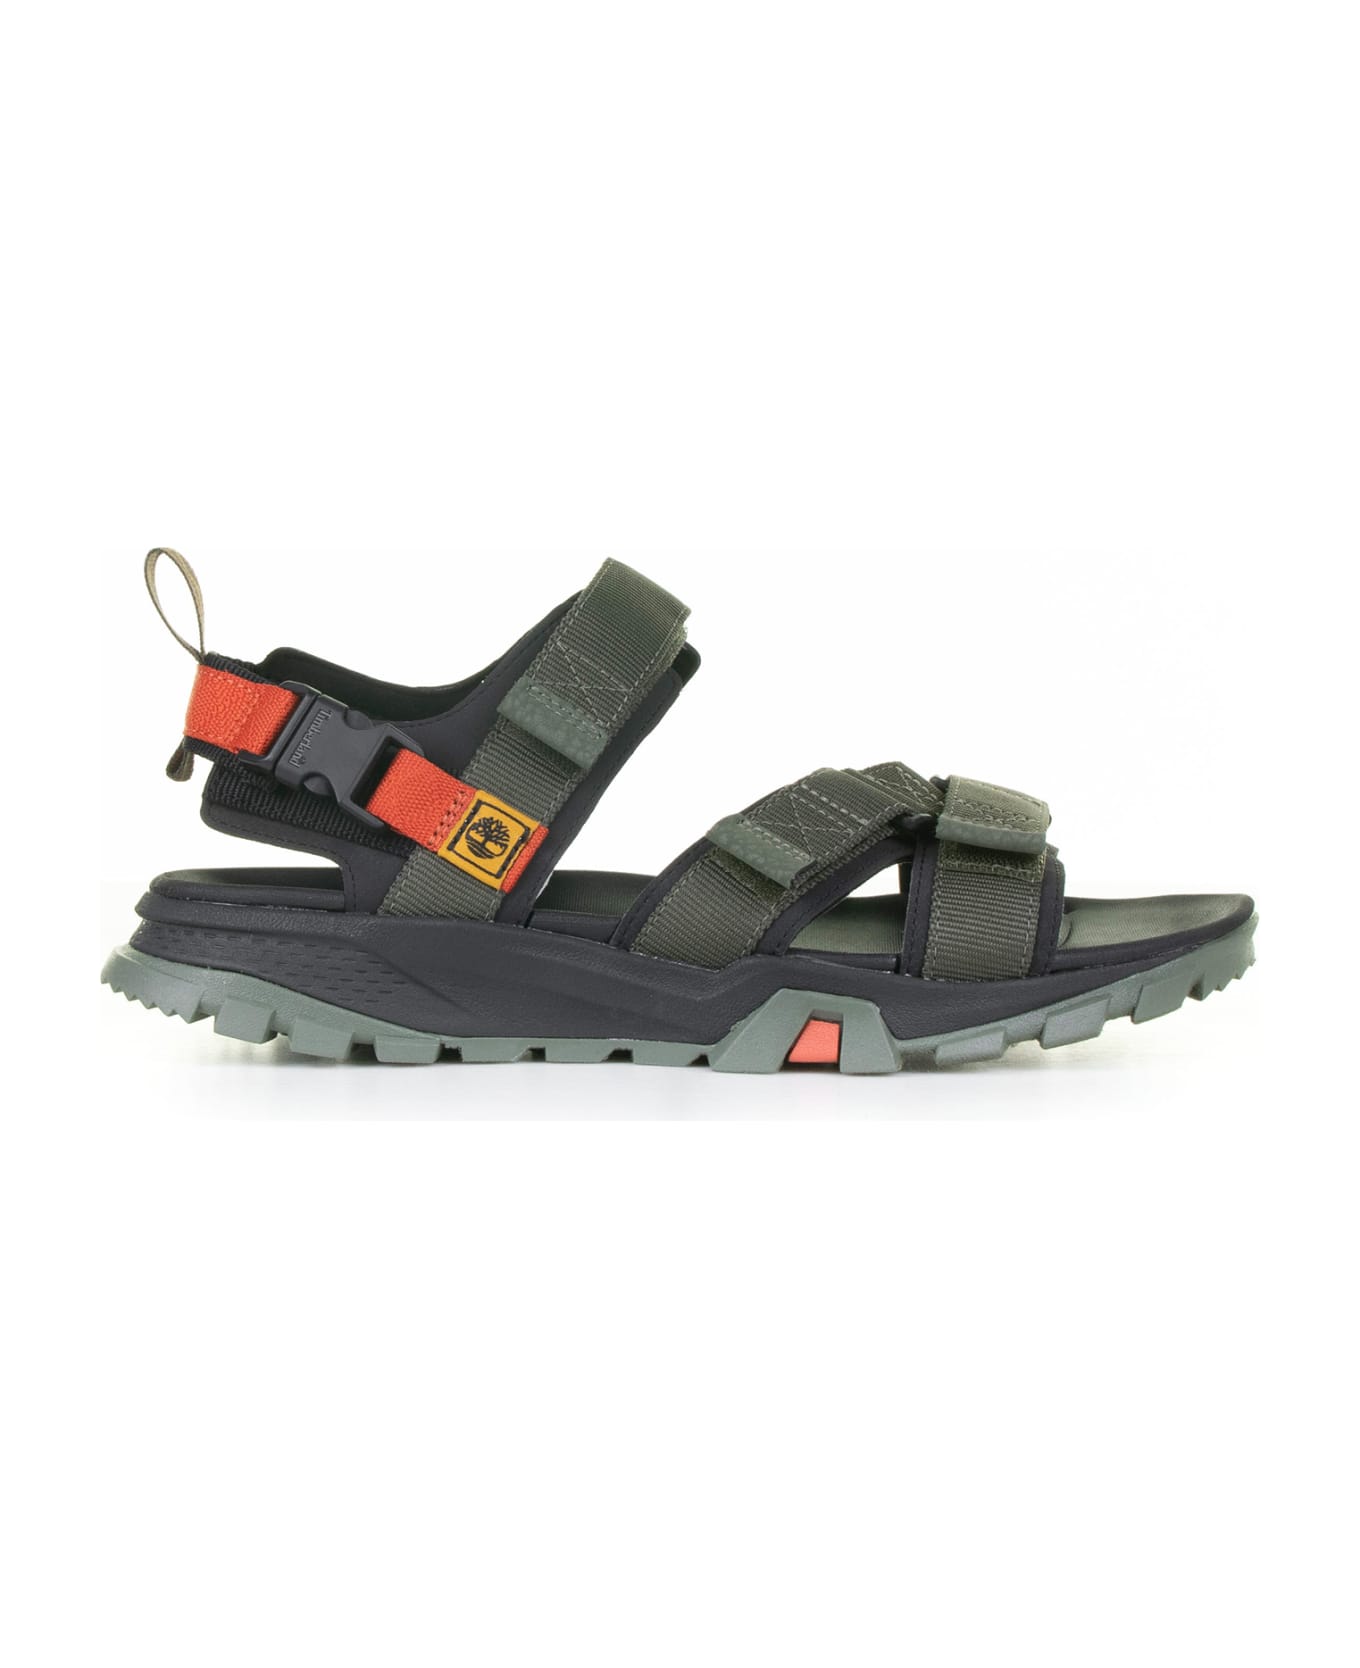 Timberland Sandals With Adjustable Velcro Straps - LEAF GREEN